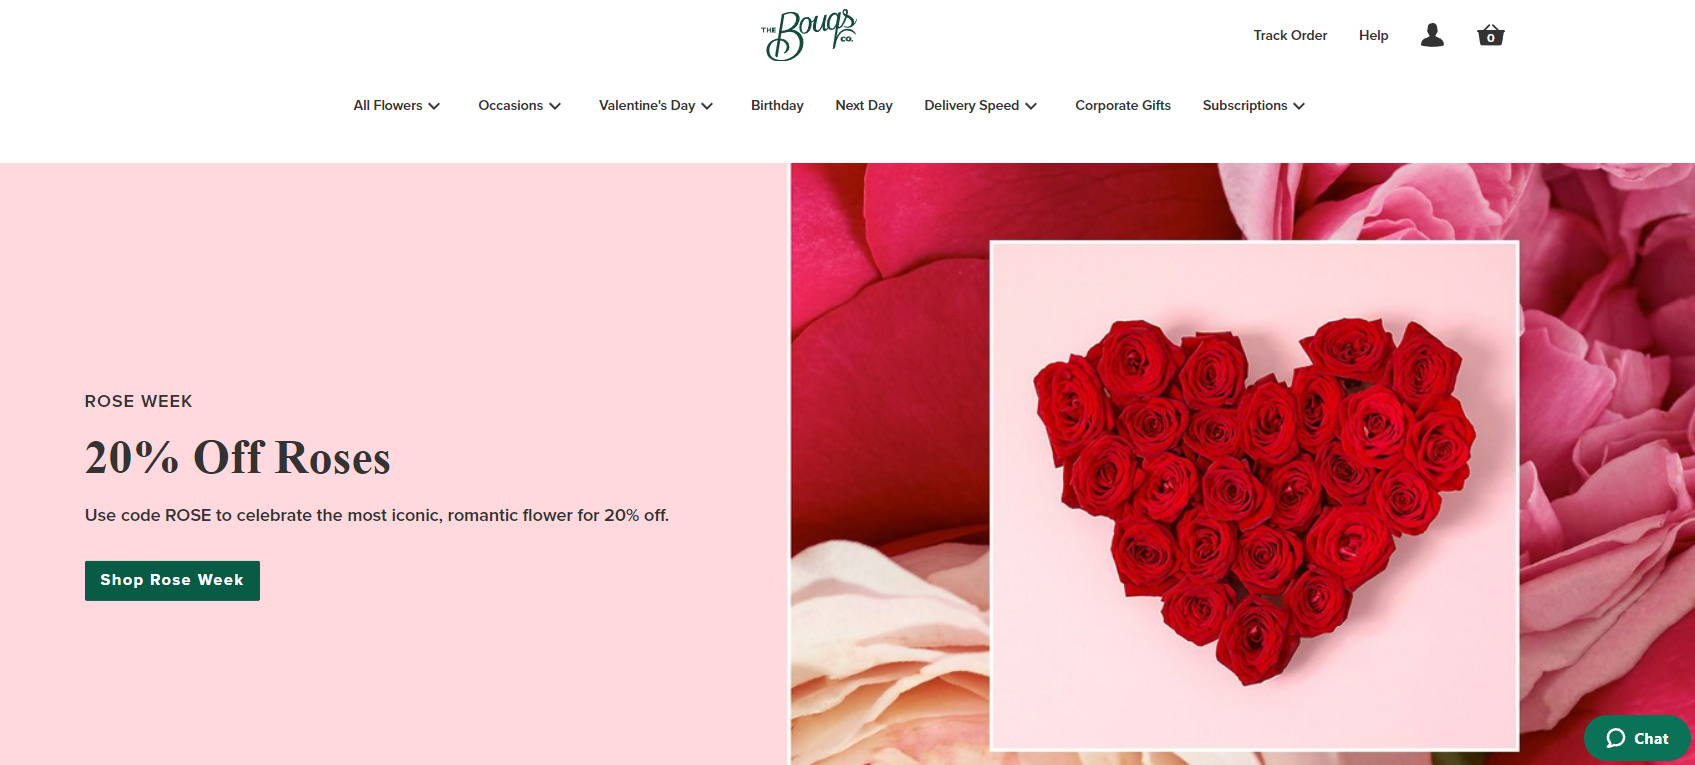 The Bouqs homepage